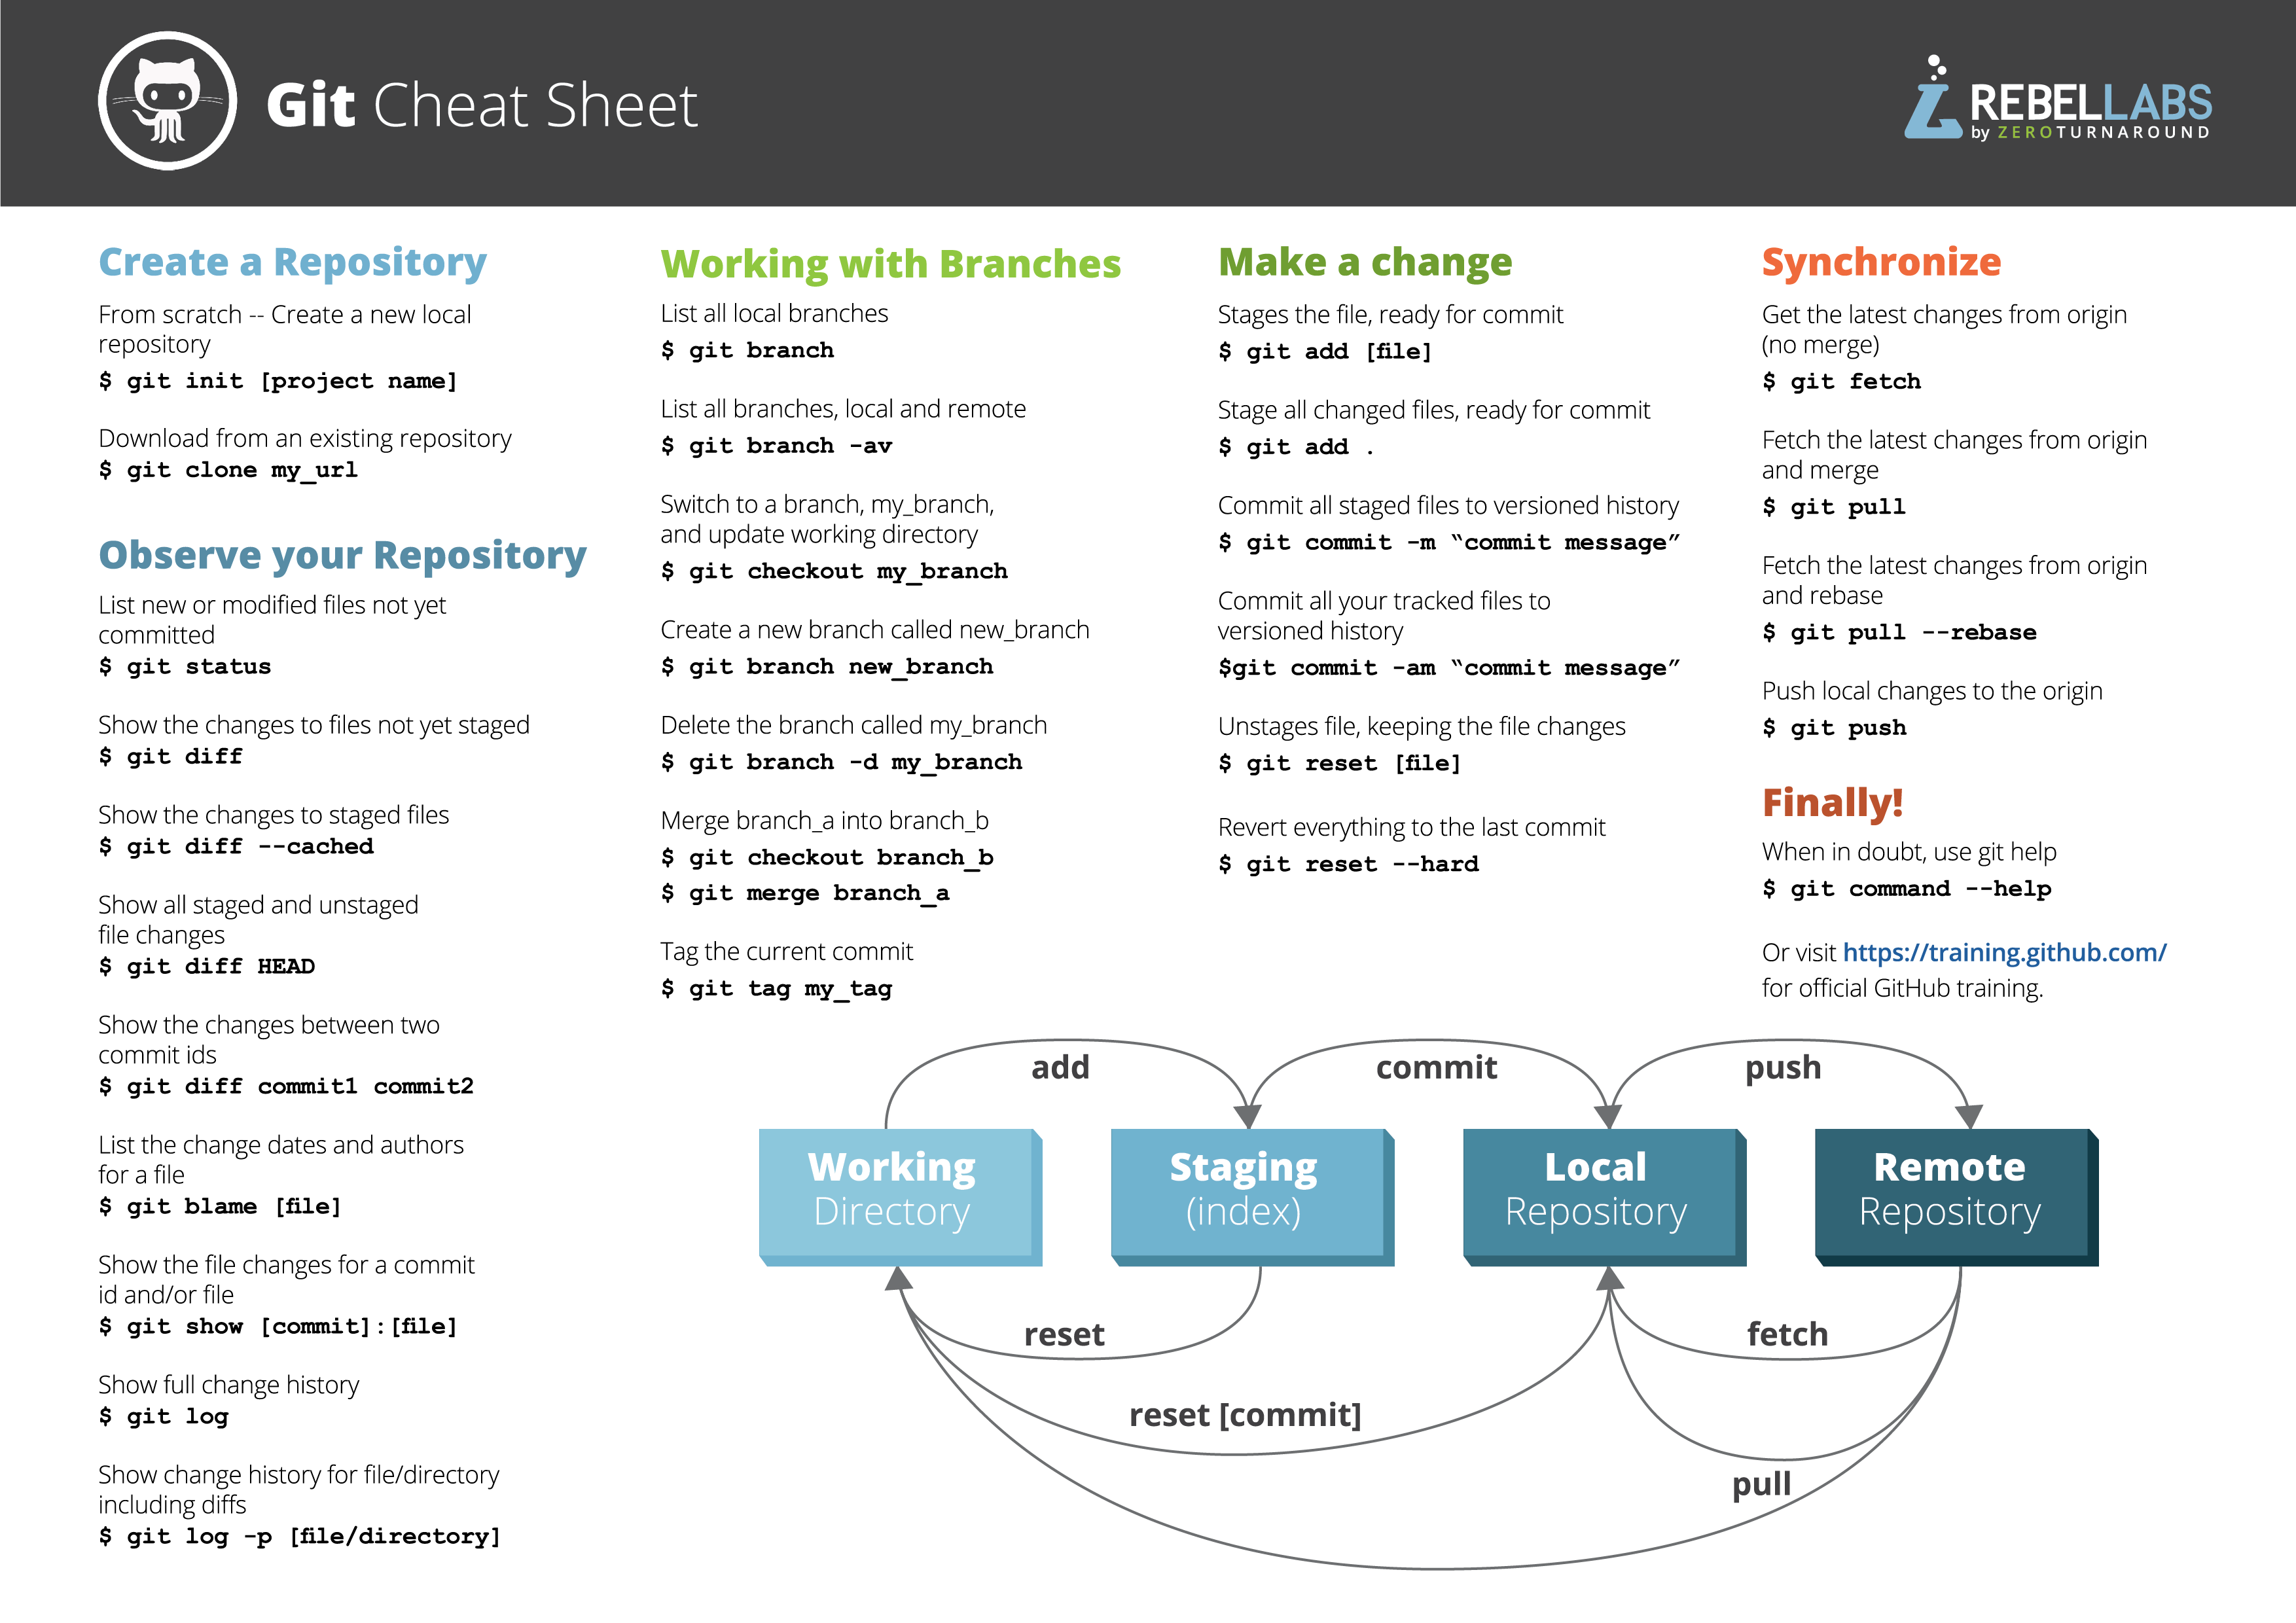 git cheat sheet from rebel labs